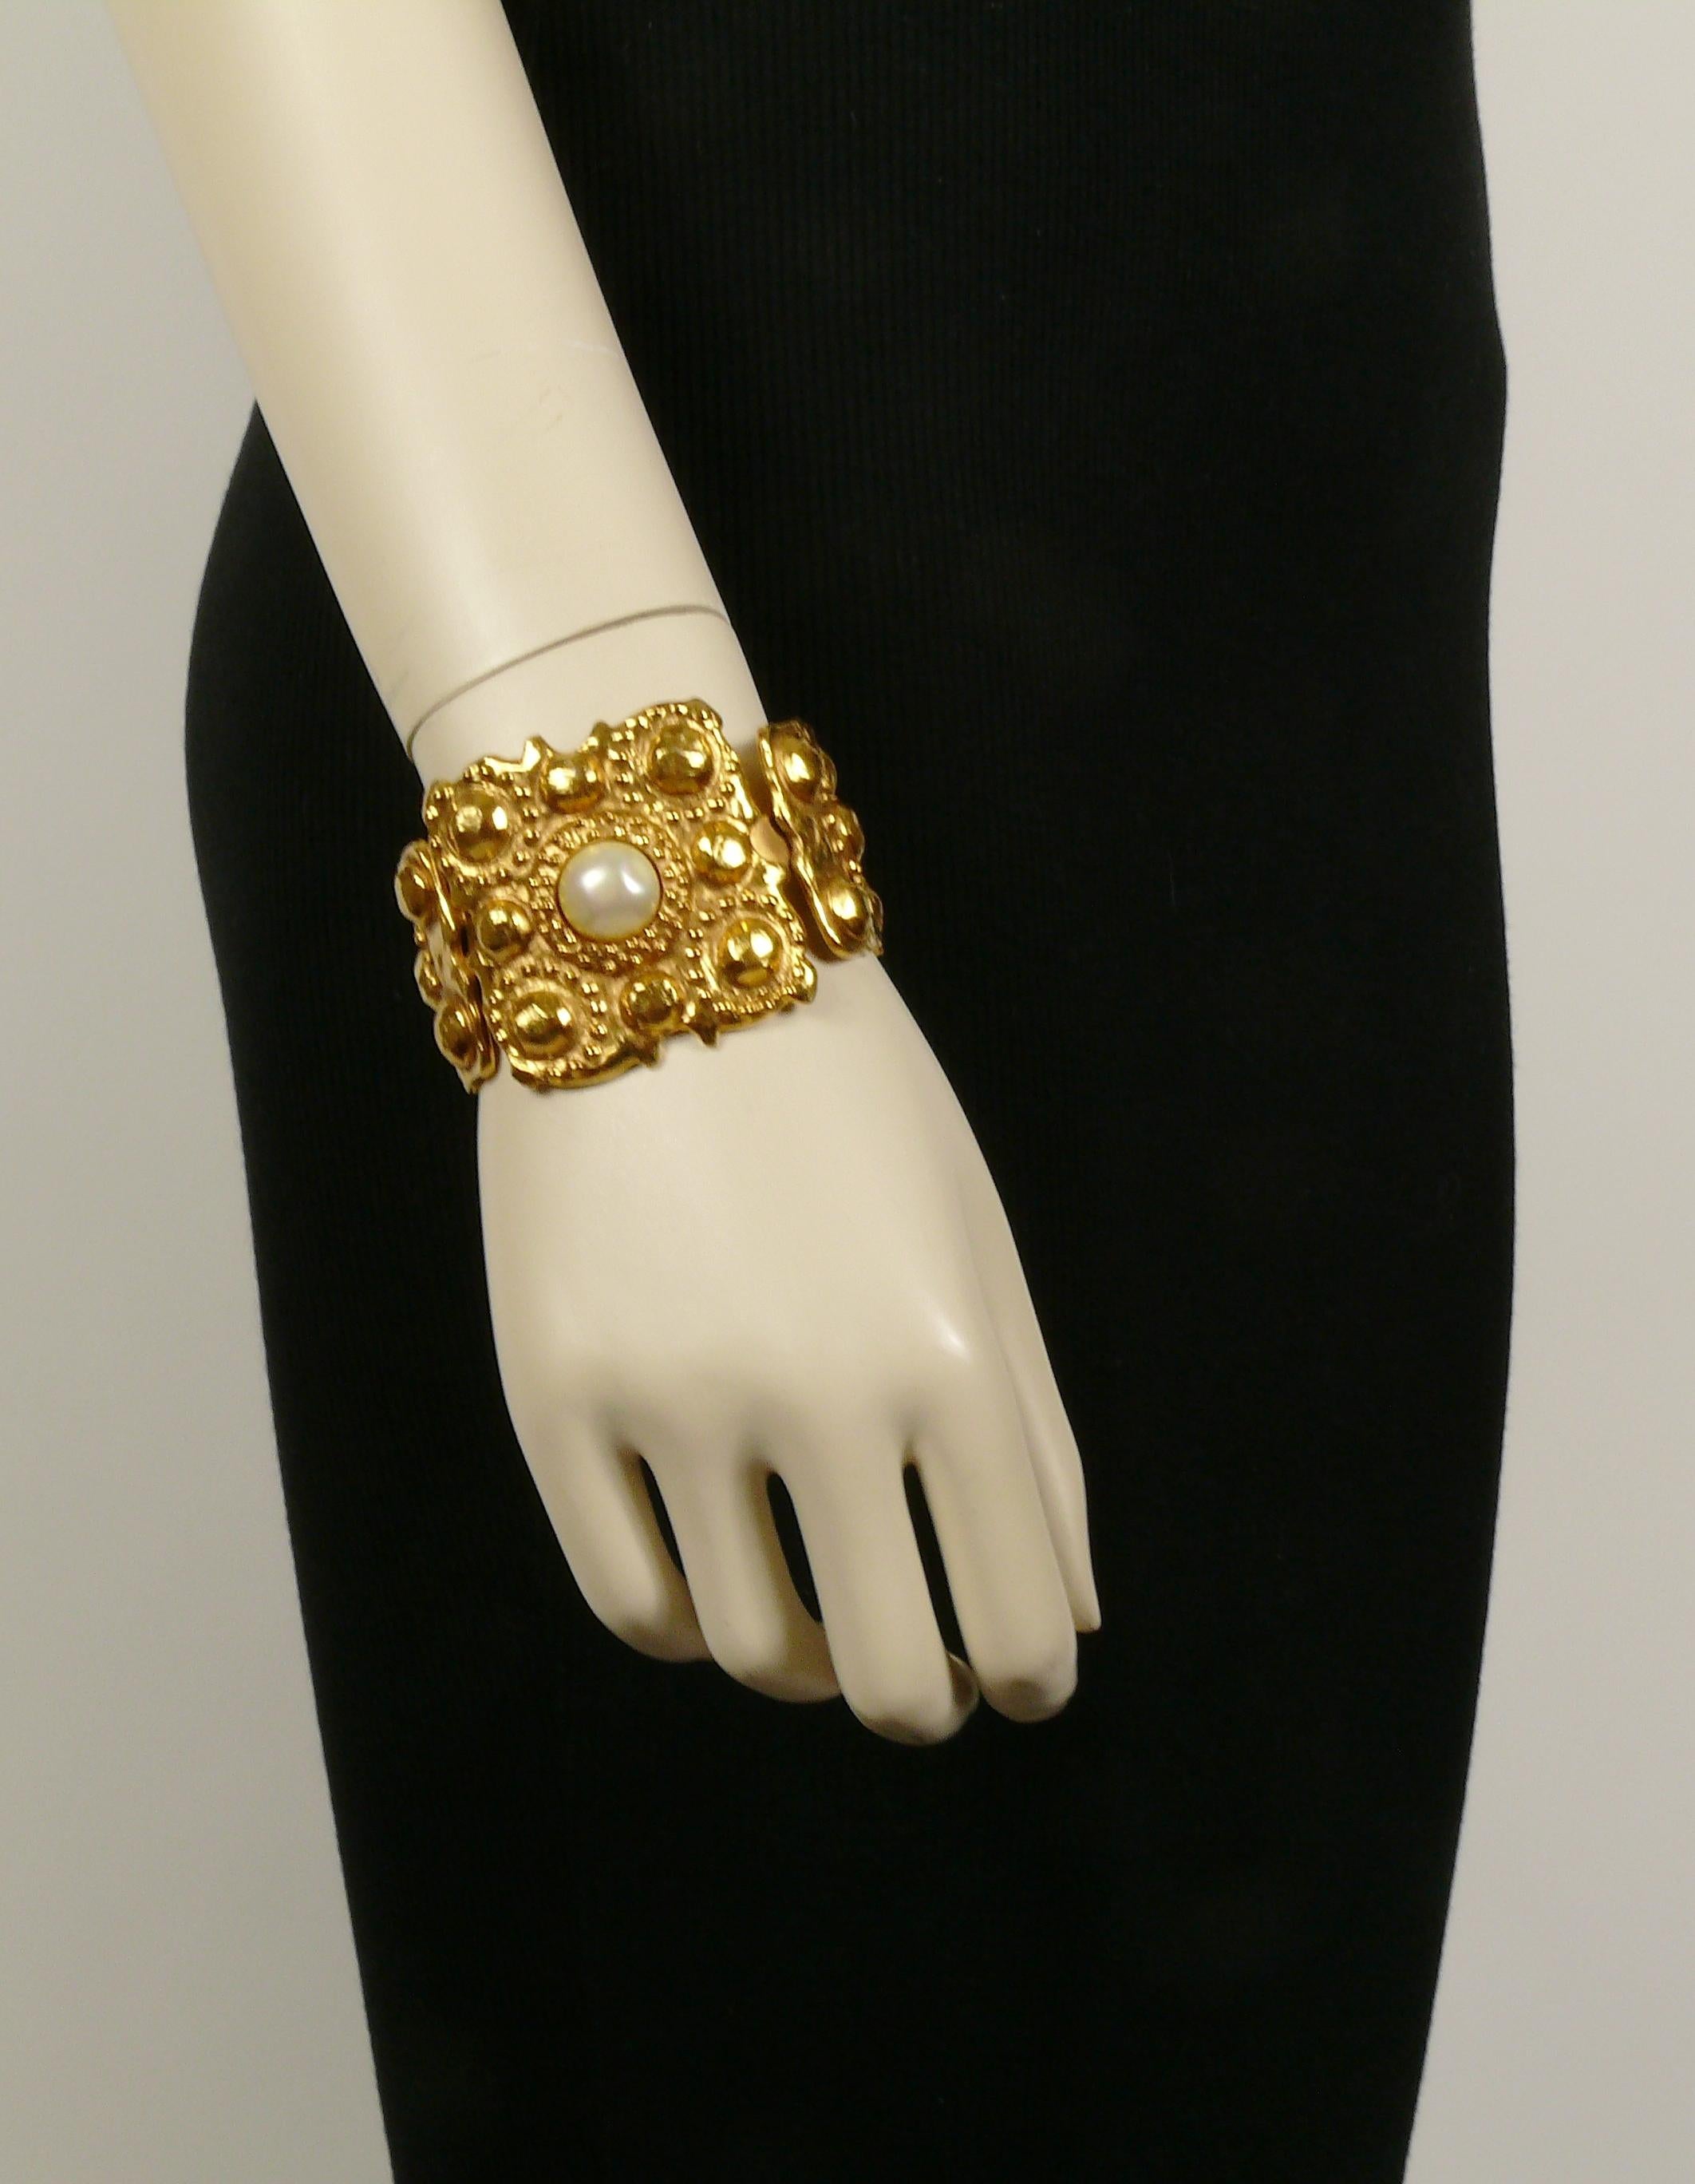 CHANEL vintage Byzantine inspired gold toned bracelet featuring graduated 3 dimensional 